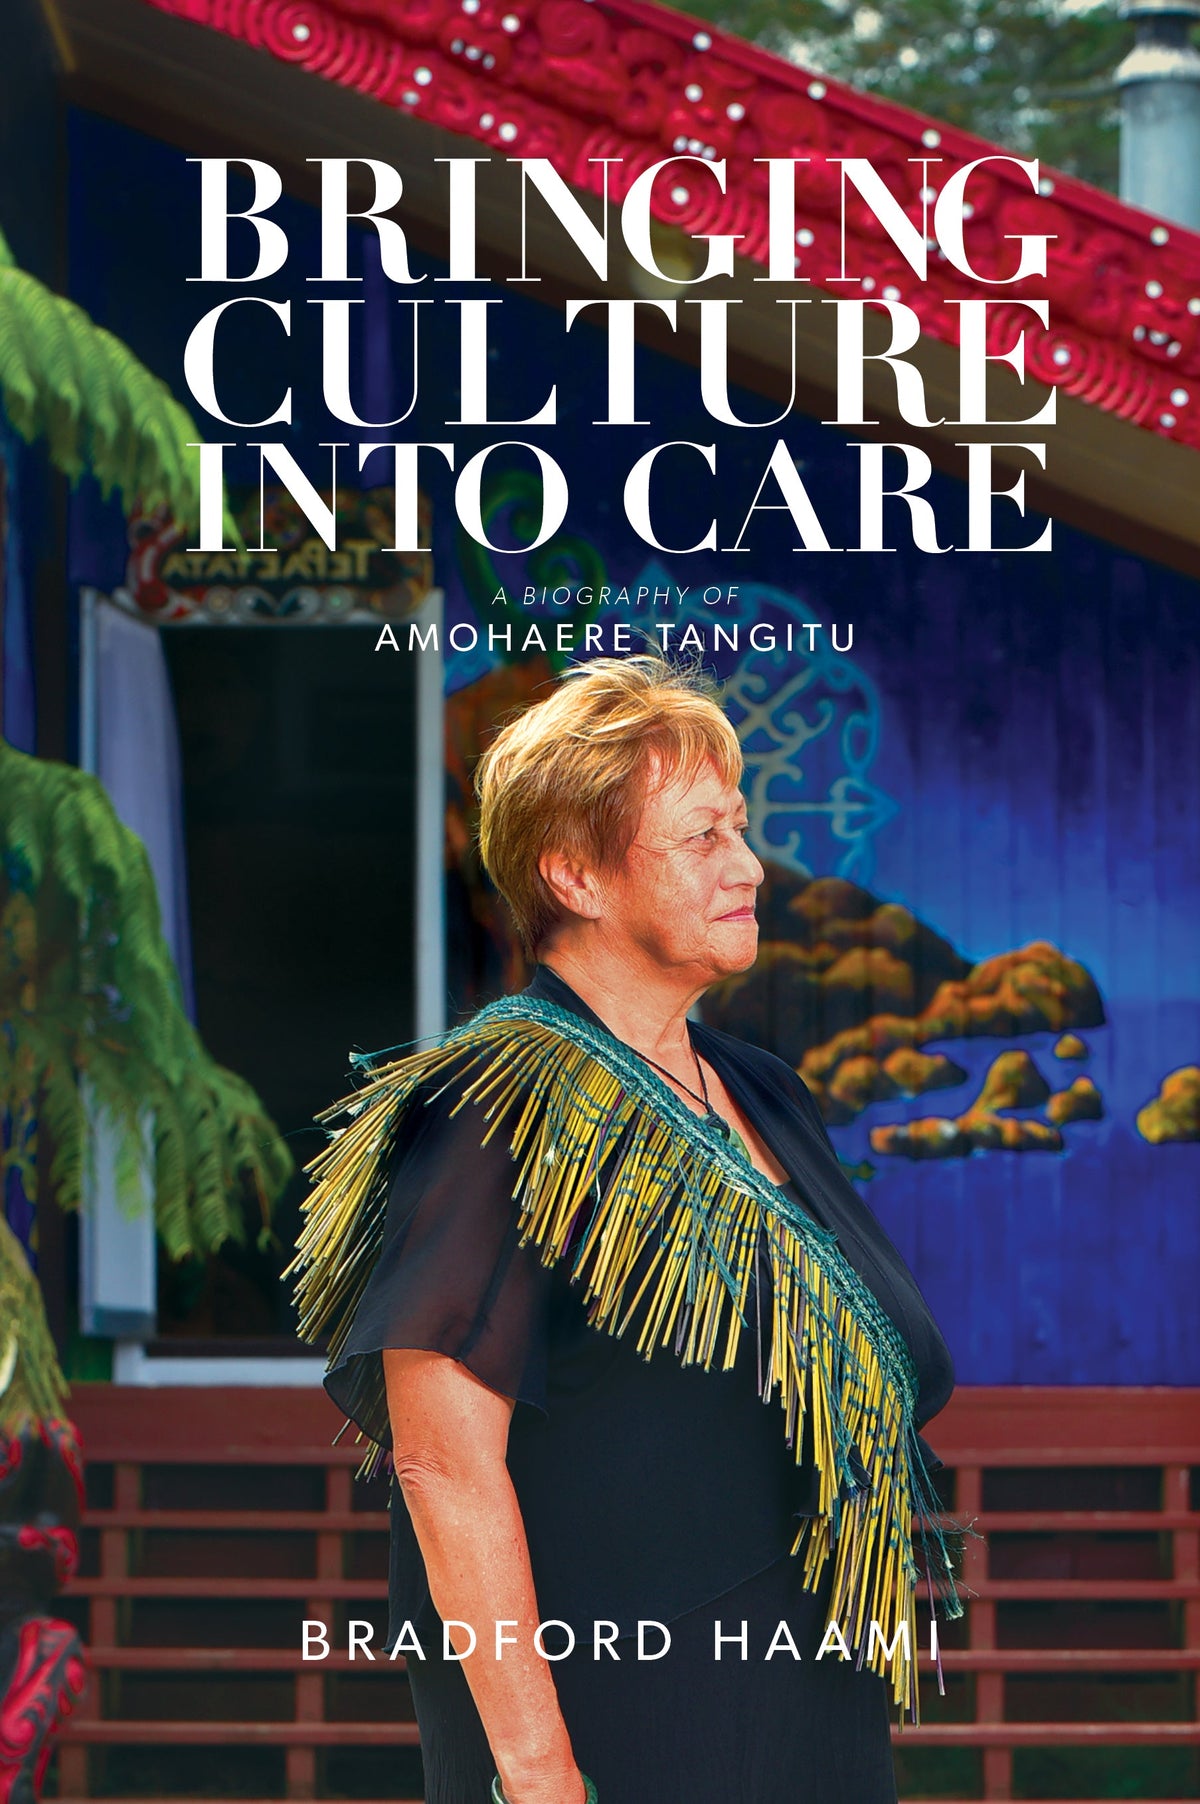 Bringing Culture into Care A Biography of Amohaere Tangitu by Bradford Haami